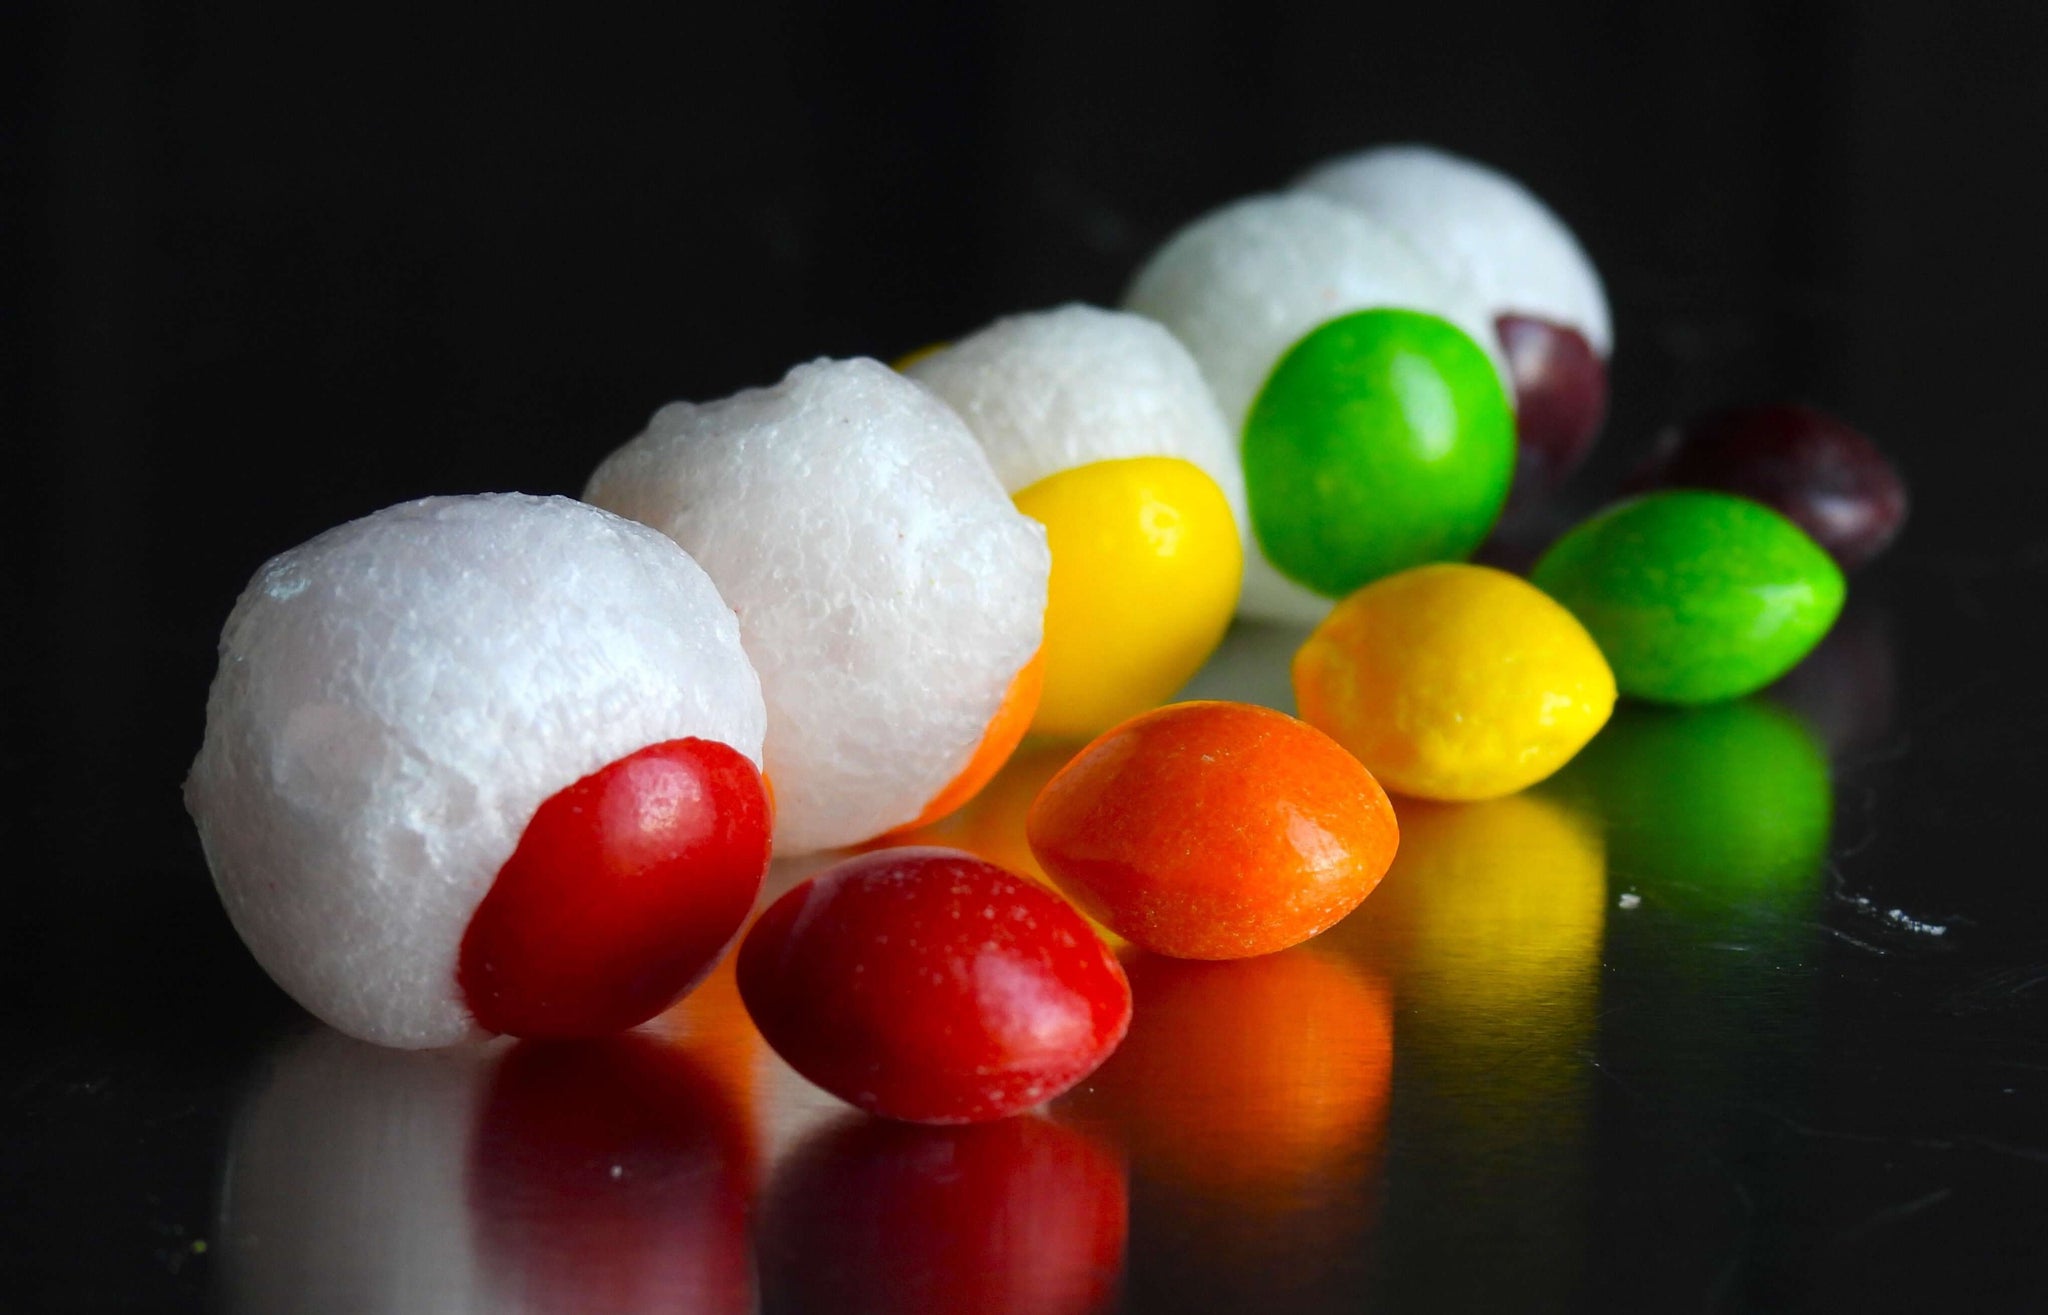 How To Make Puffed Skittles Candy WITHOUT A Freeze Dryer Ep230 